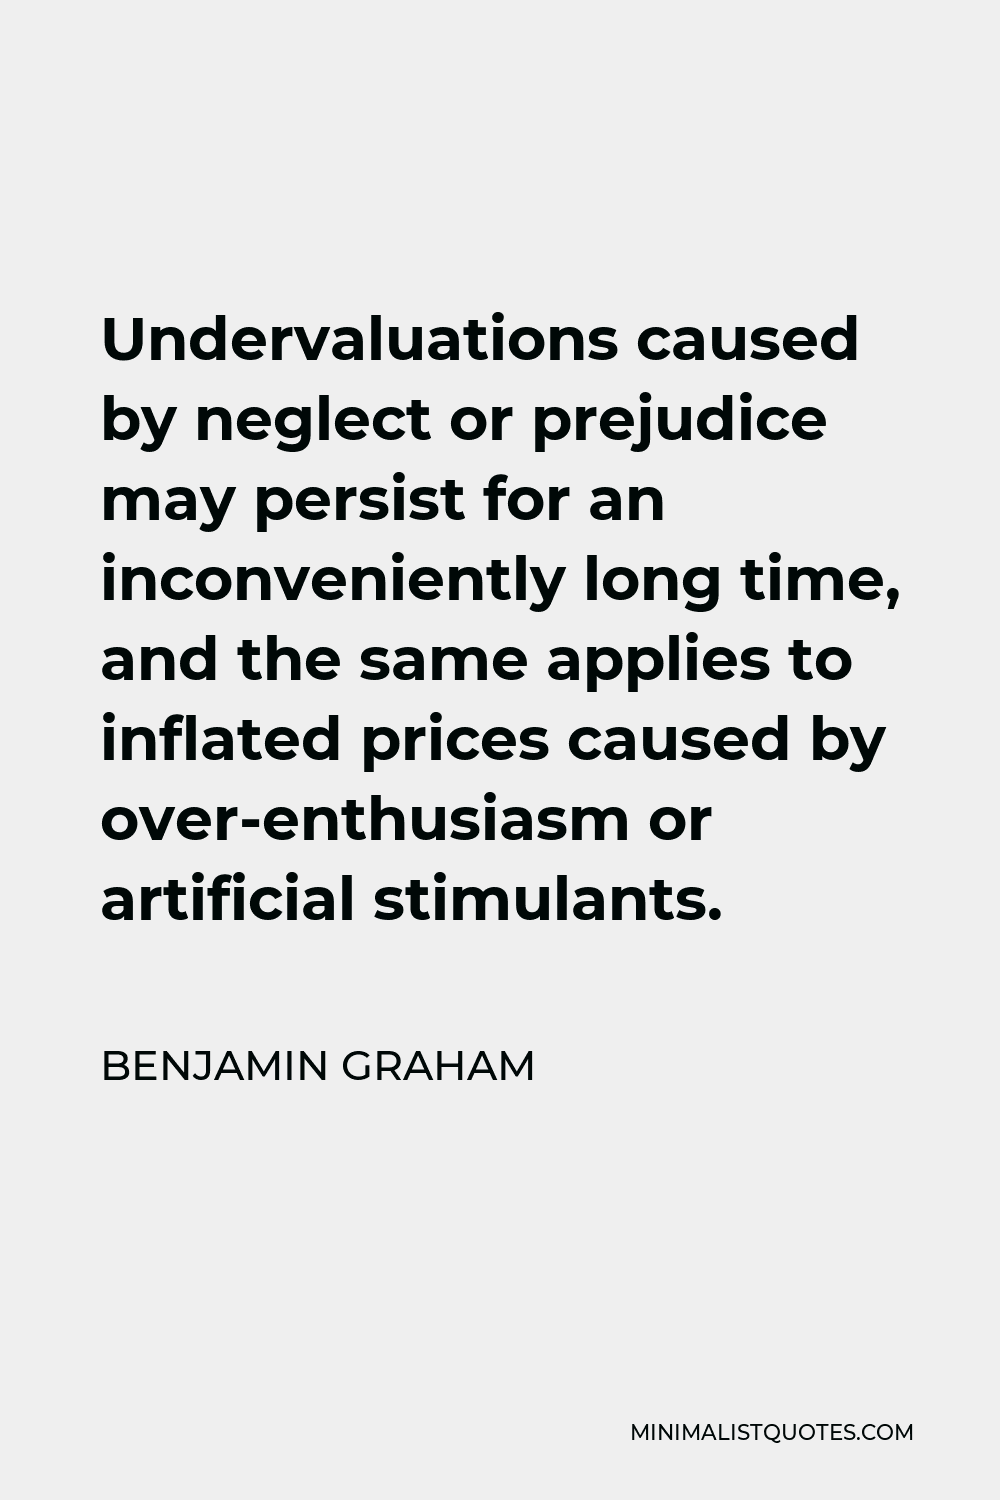 Benjamin Graham Quote - Undervaluations caused by neglect or prejudice may persist for an inconveniently long time, and the same applies to inflated prices caused by over-enthusiasm or artificial stimulants.